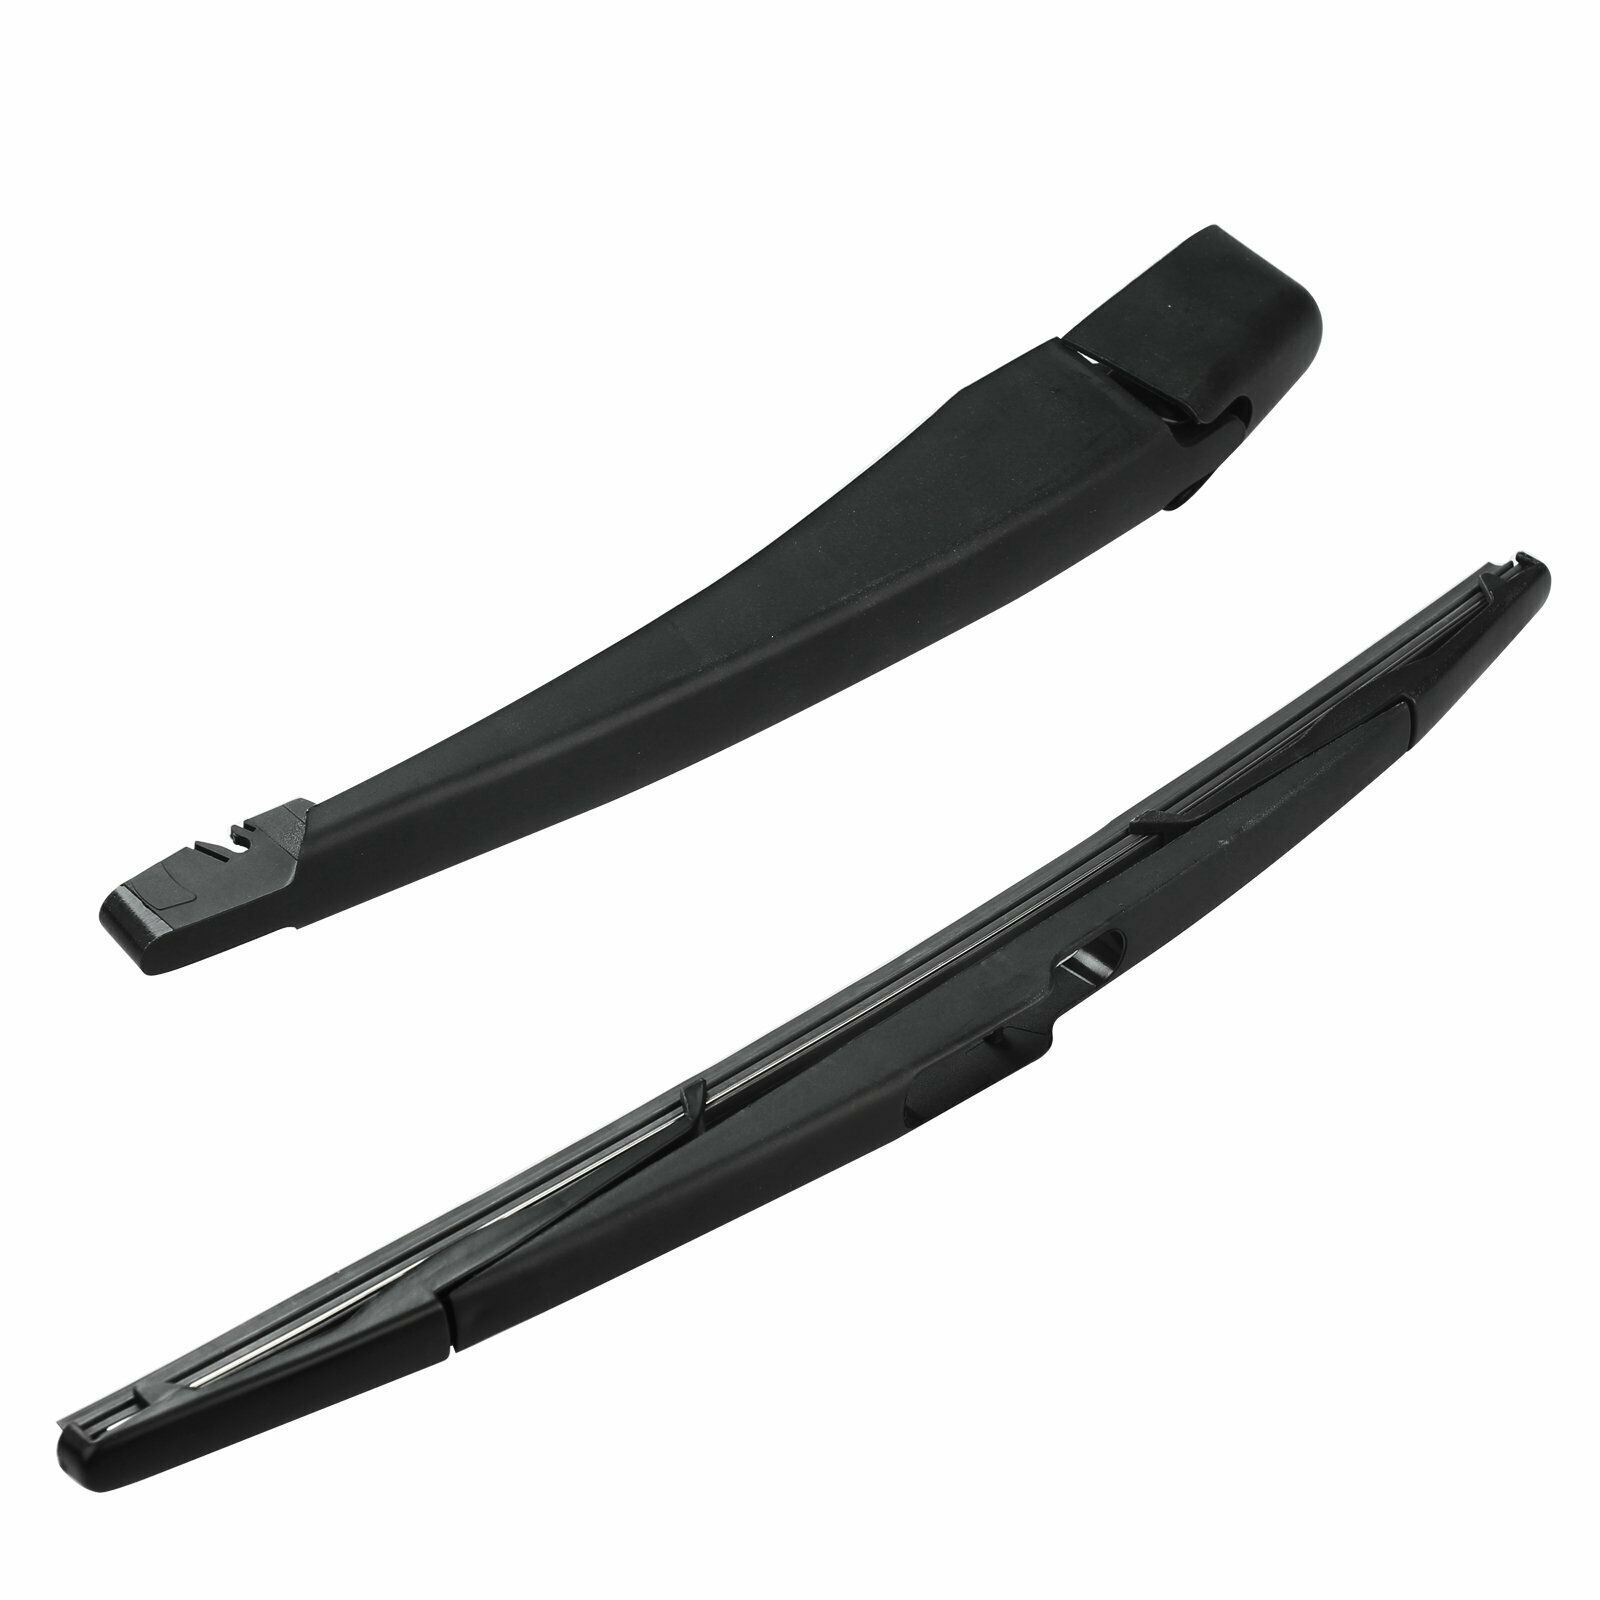 Rear Wiper Arm + Blade Set Fits Dodge Caravan Chrysler Town & Country 2008-2009 - Windshield Chrysler Town And Country Wiper Blade Size